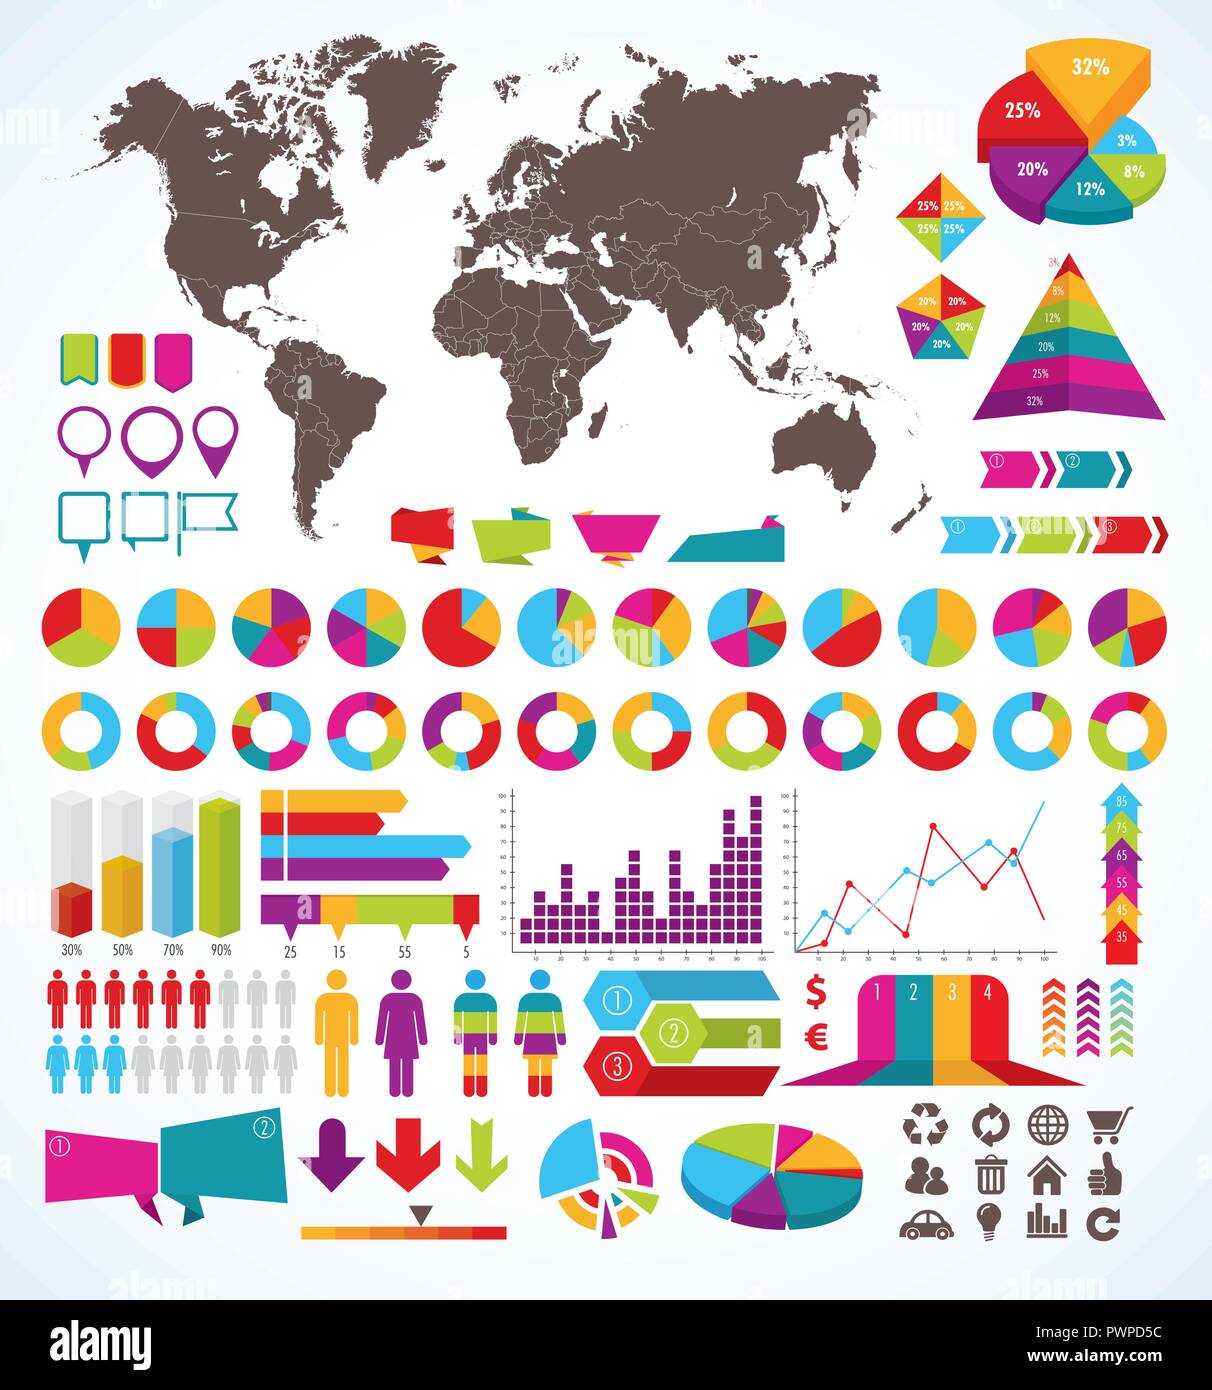 Set of elements for infographic for your design Stock Vector